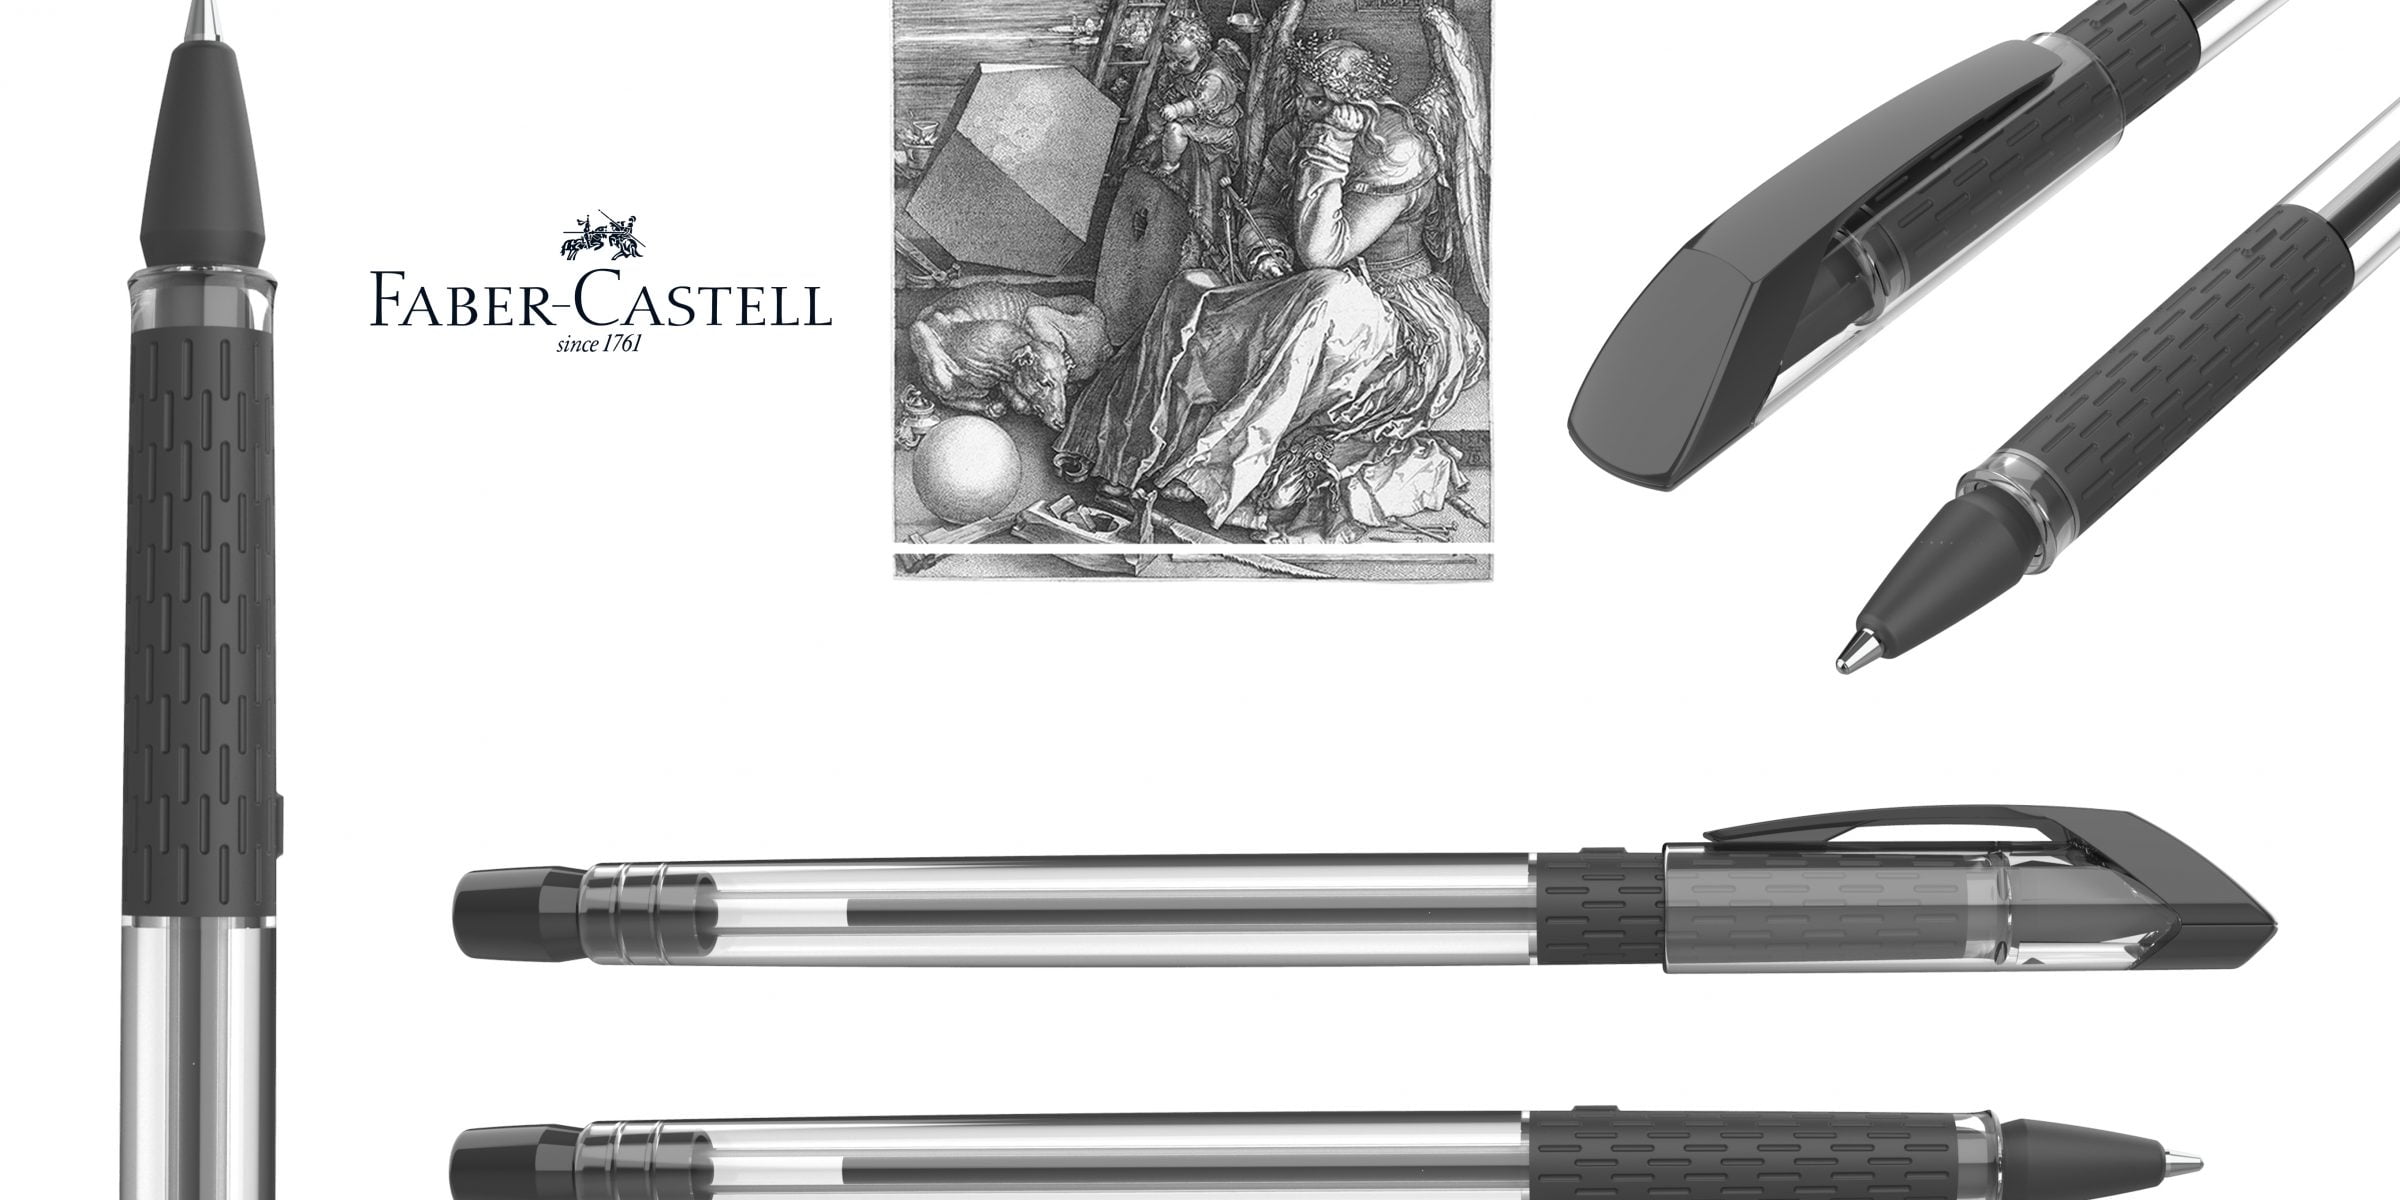 Faber-castell-luxurious-stationery products